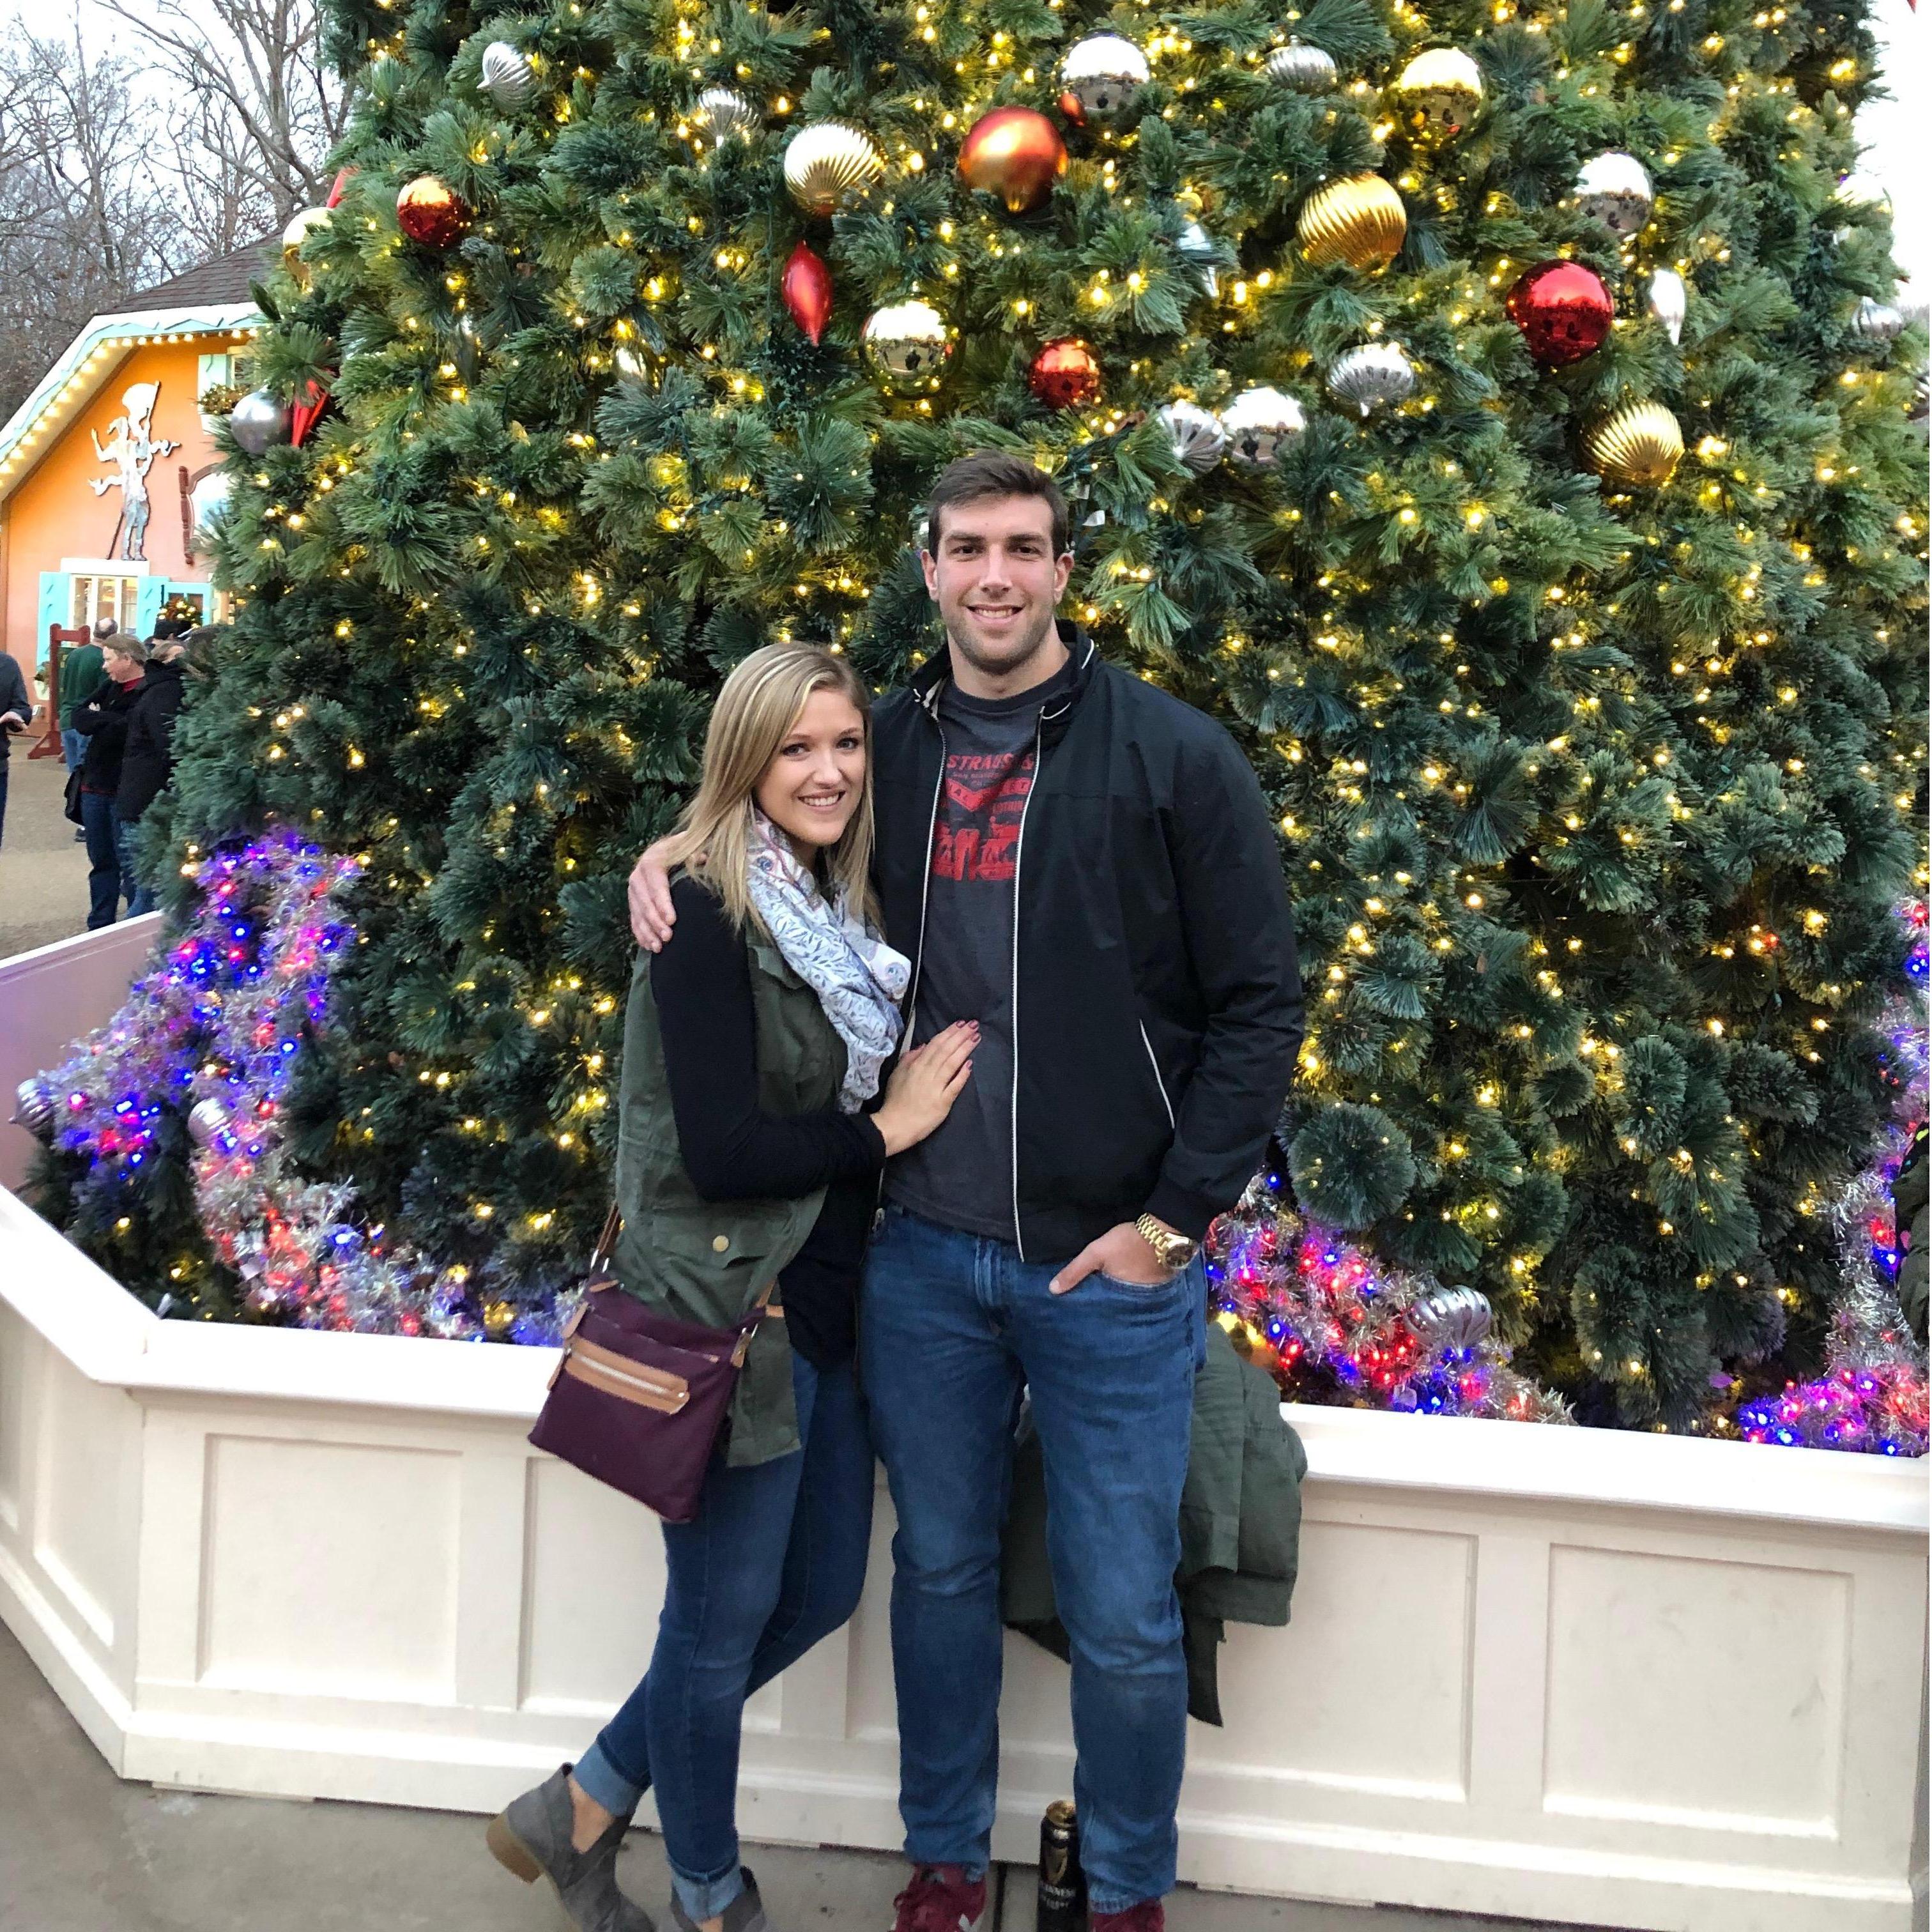 We went to Busch Gardens Christmas Town to recreate Europe where we met. Fake Europe was almost as good, but with hot pretzels.